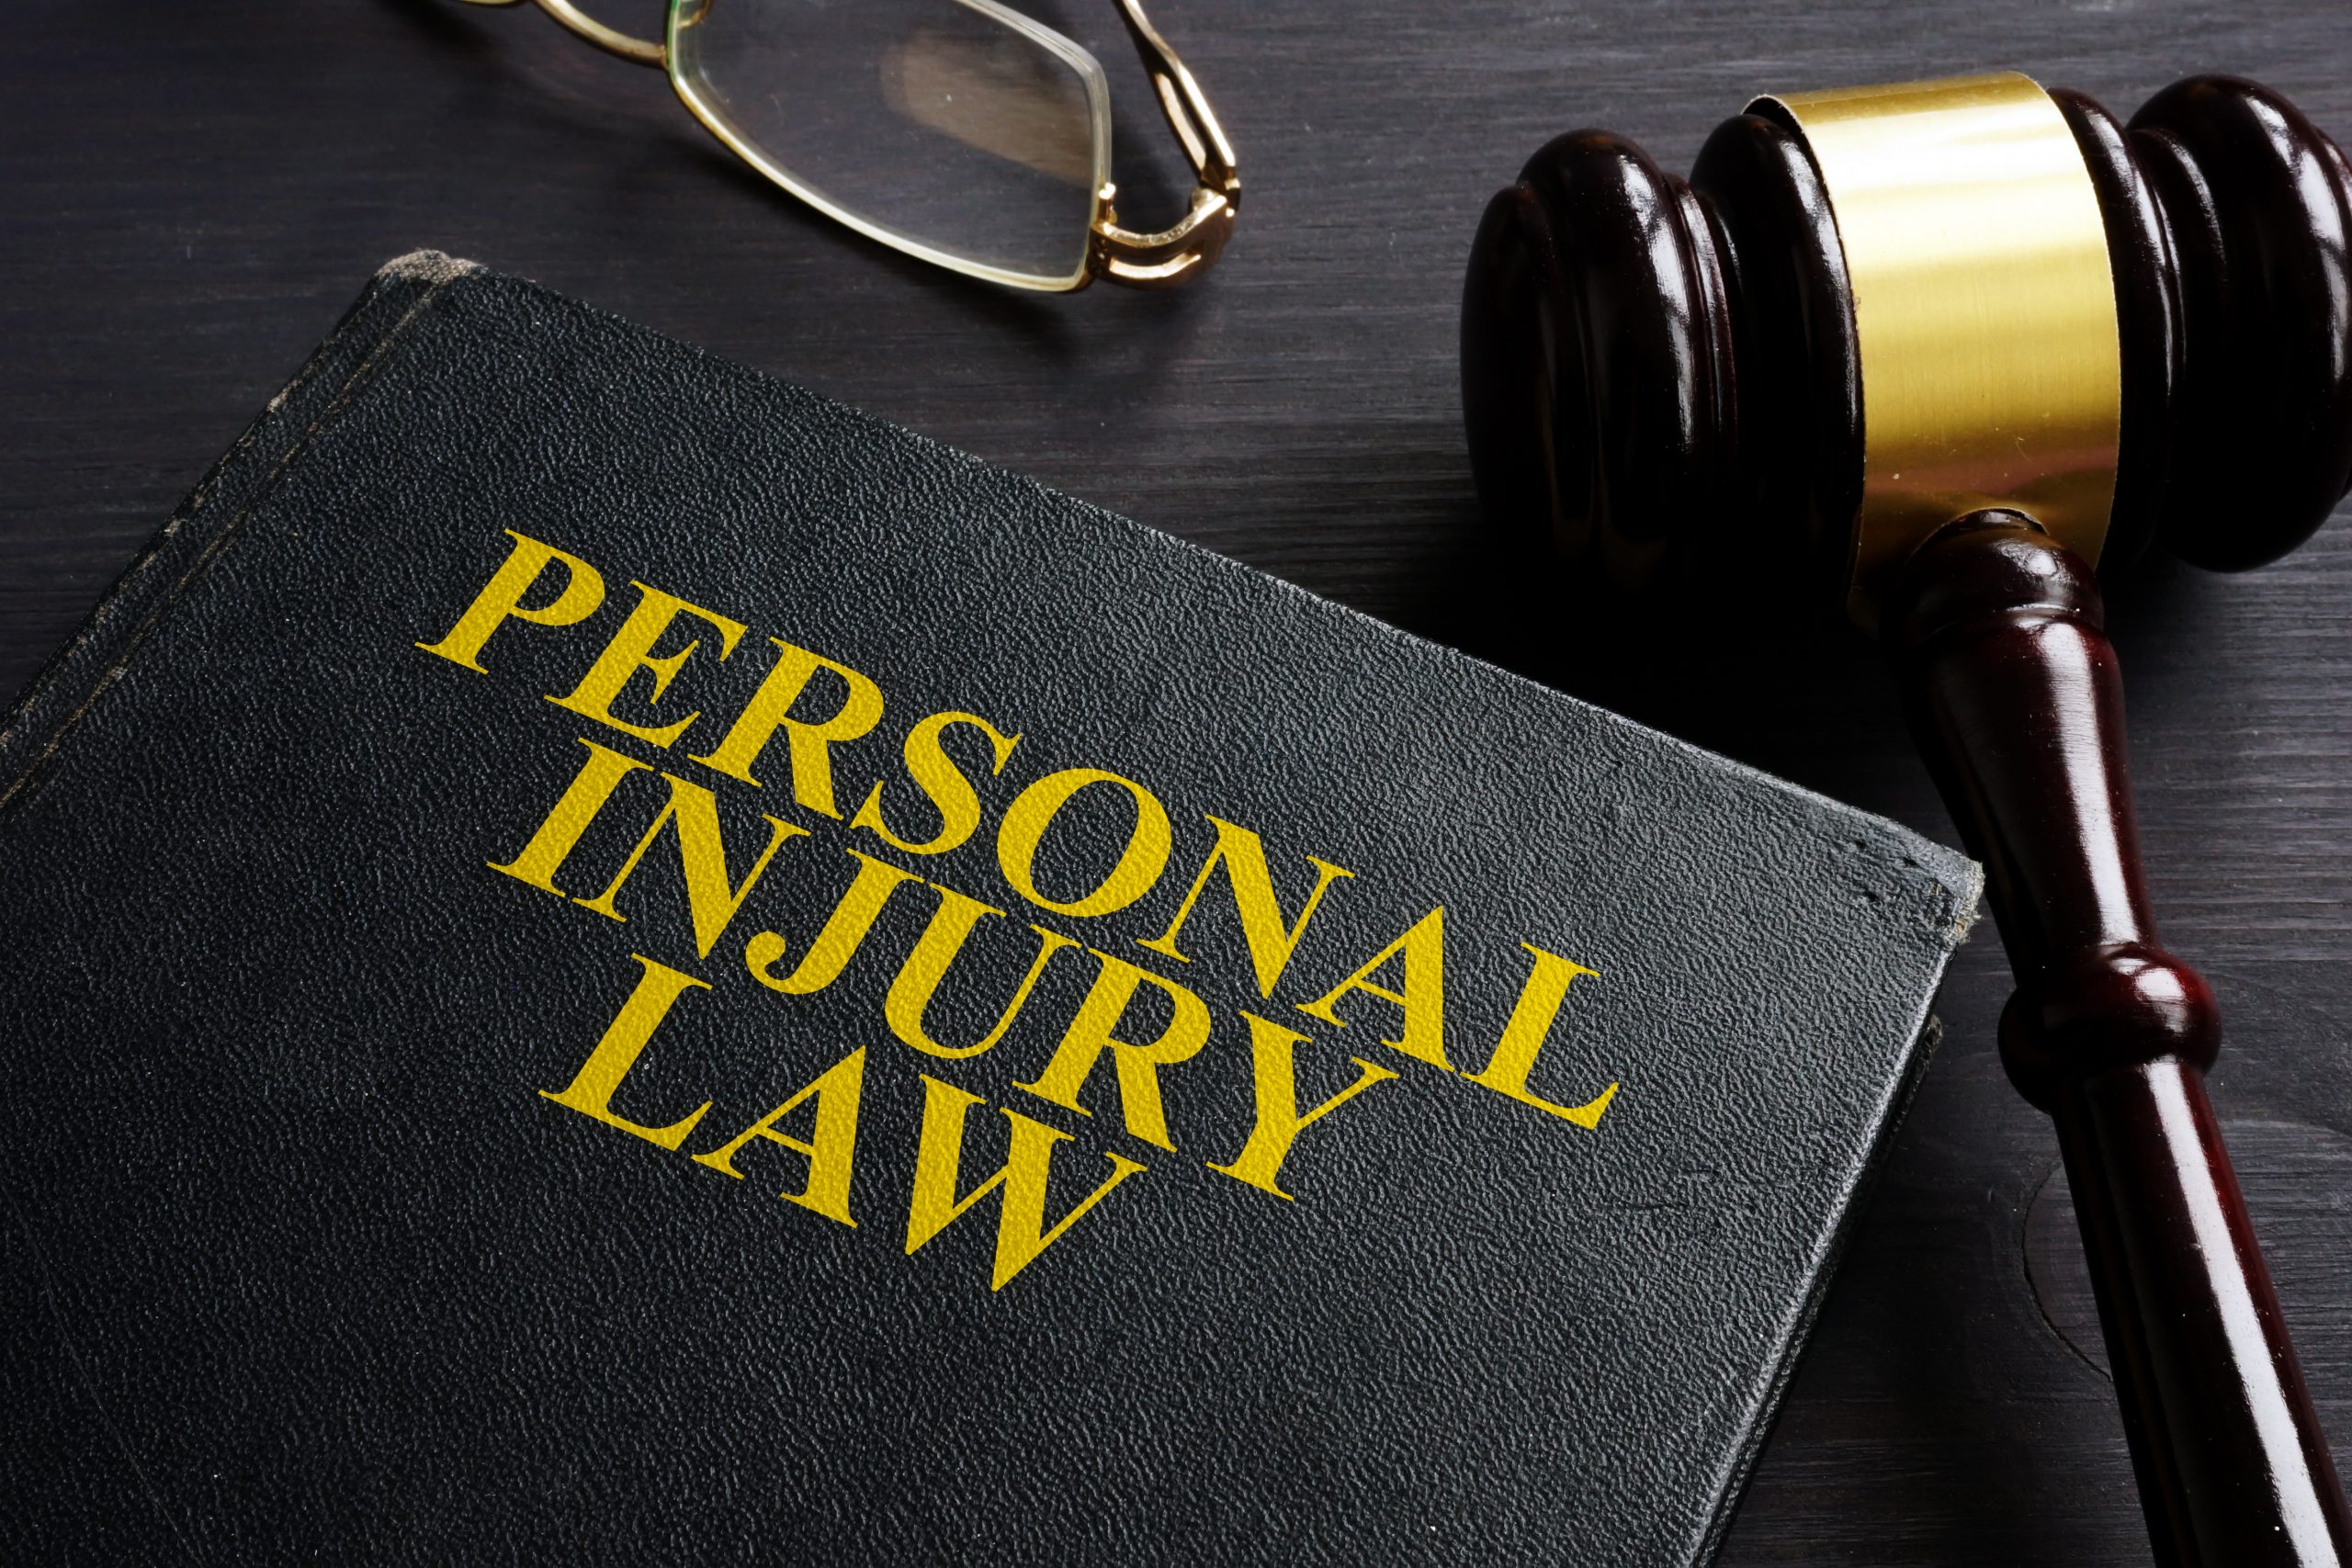 Personal Injury Law book and a black desk.